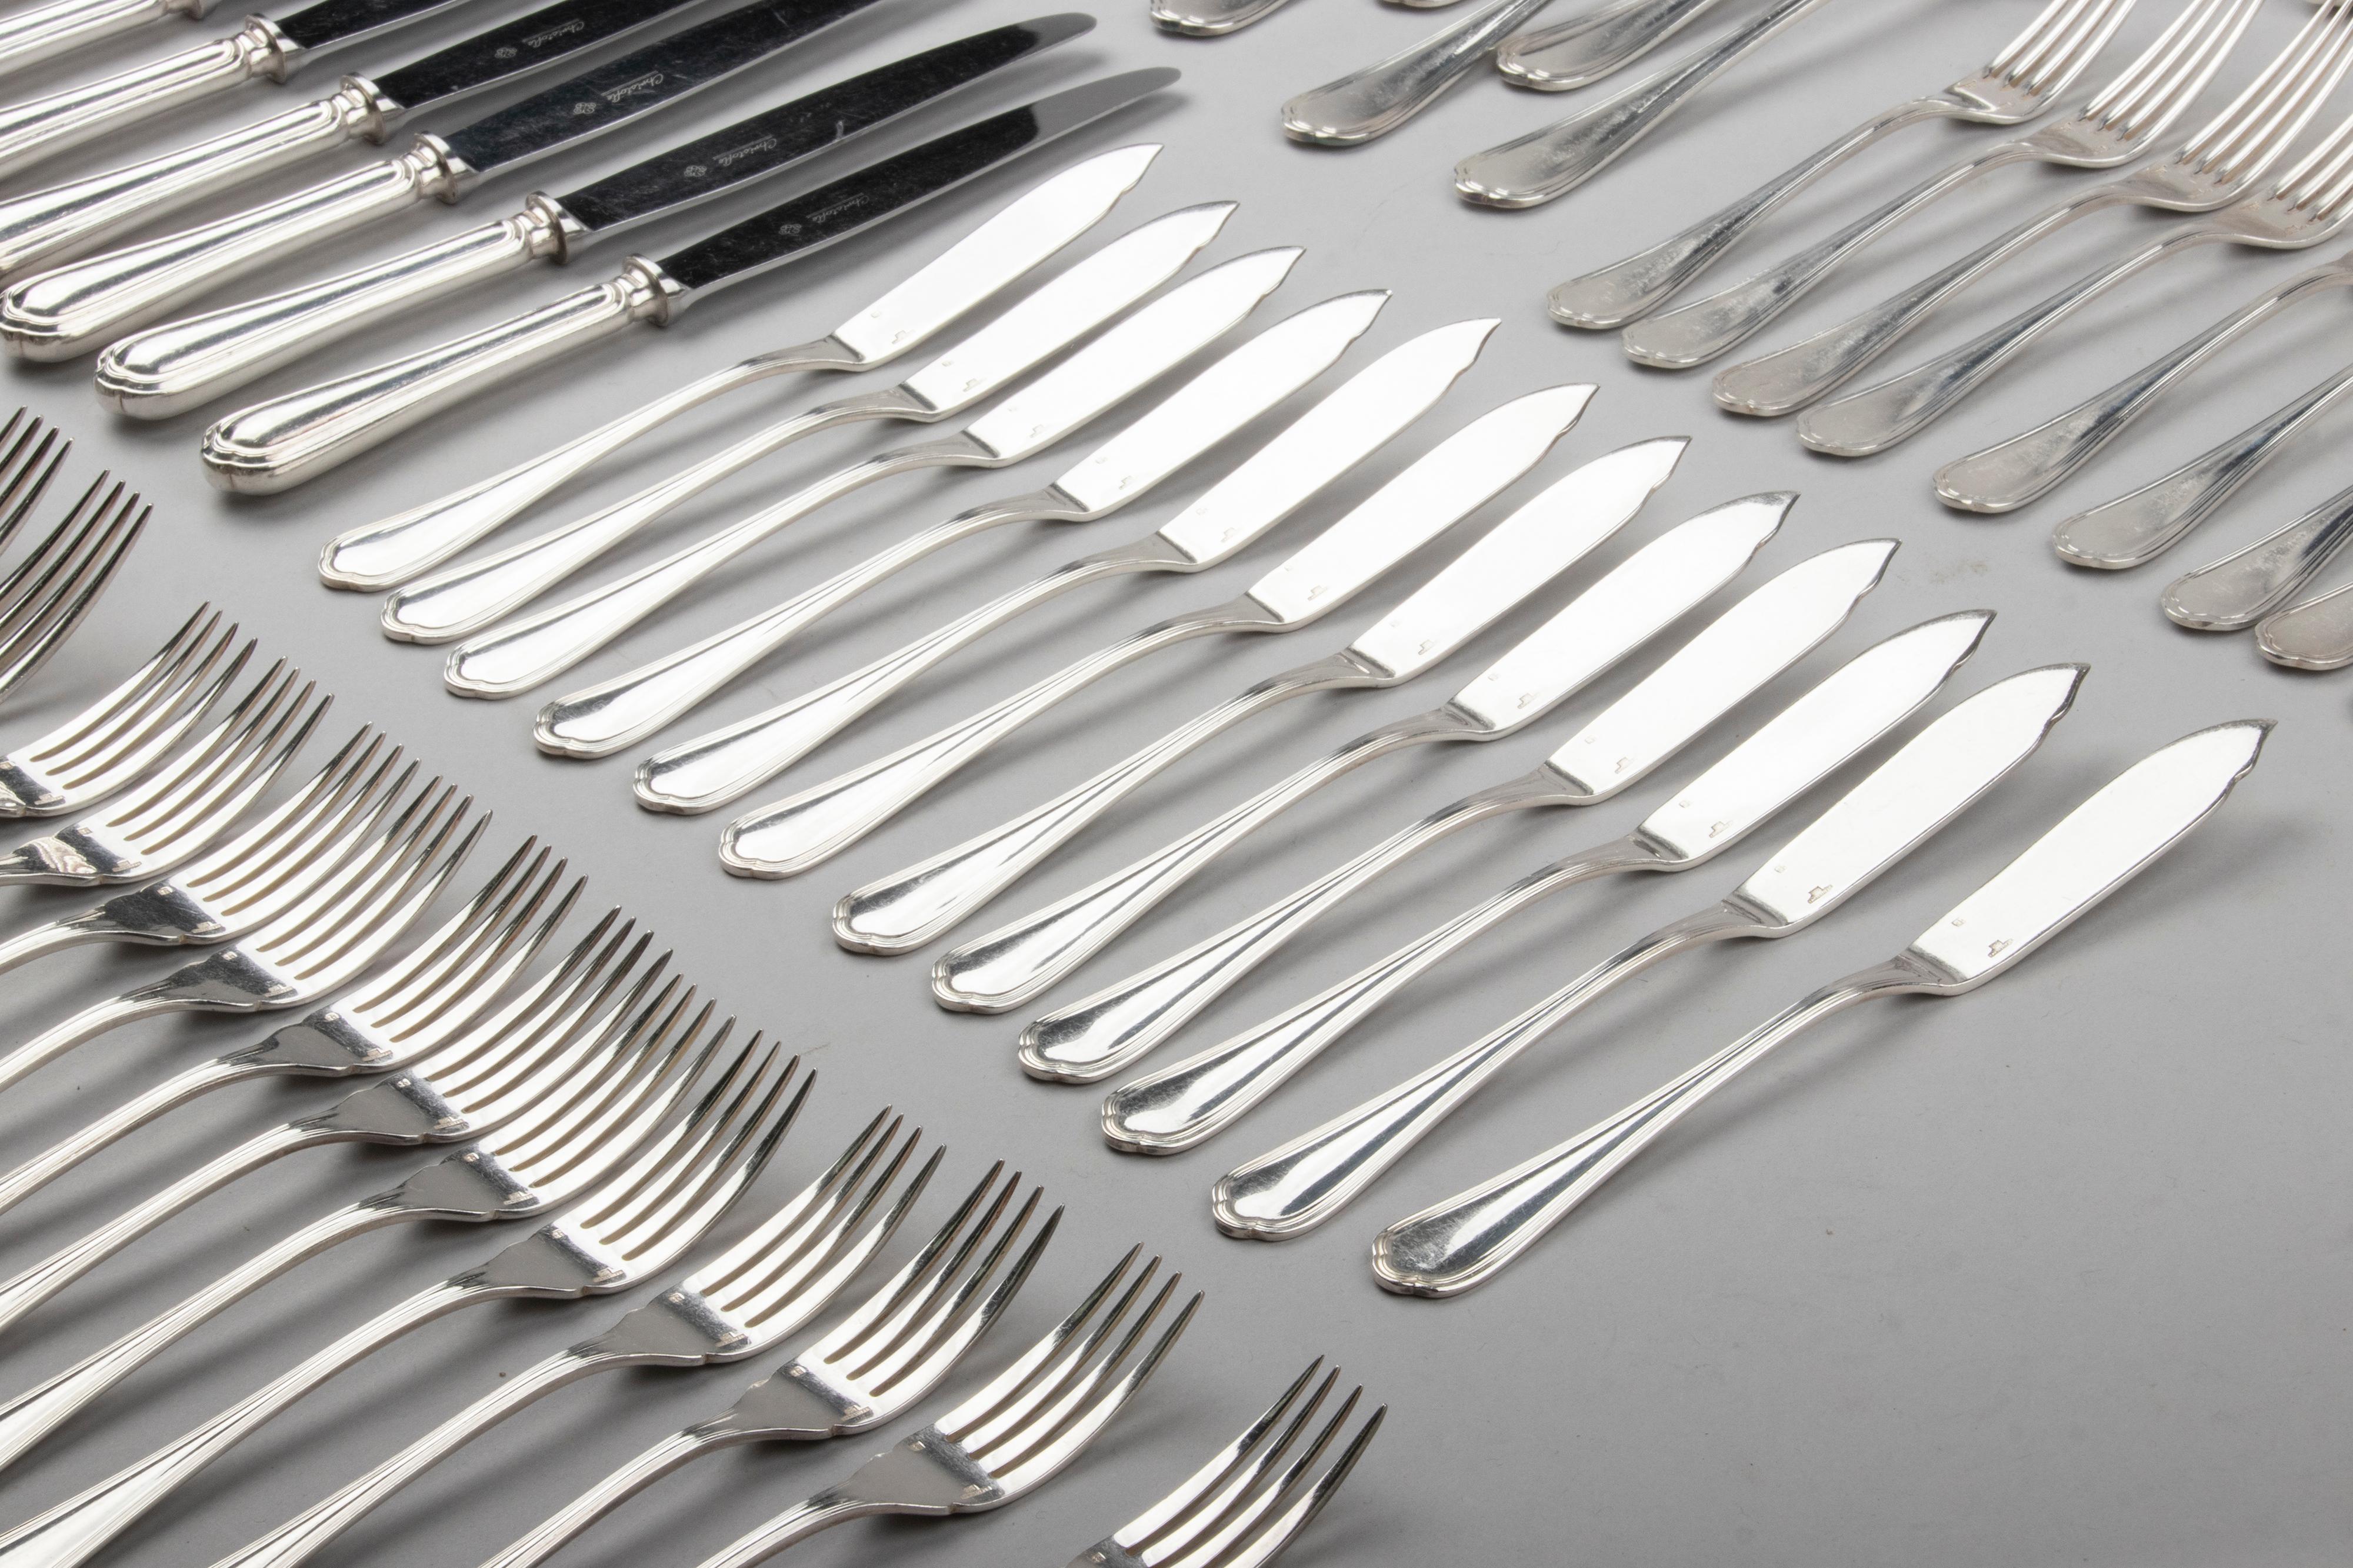 96-Piece Set of Silver Plated Flatware by Christofle Model Spatours 14